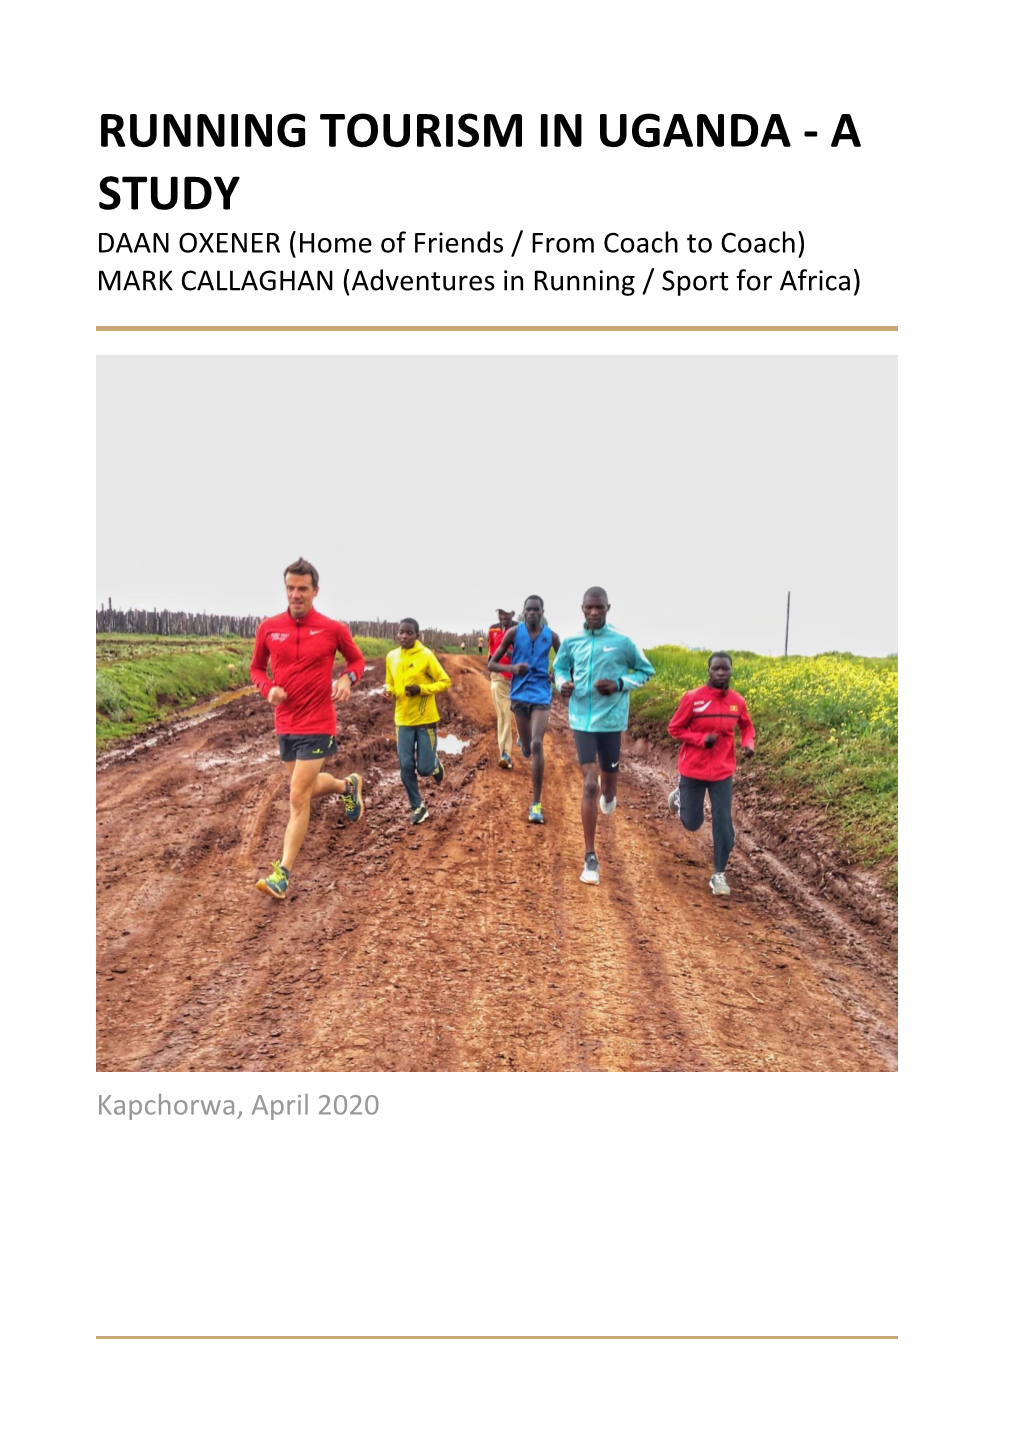 RUNNING TOURISM in UGANDA - a STUDY DAAN OXENER (Home of Friends / from Coach to Coach) MARK CALLAGHAN (Adventures in Running / Sport for Africa)